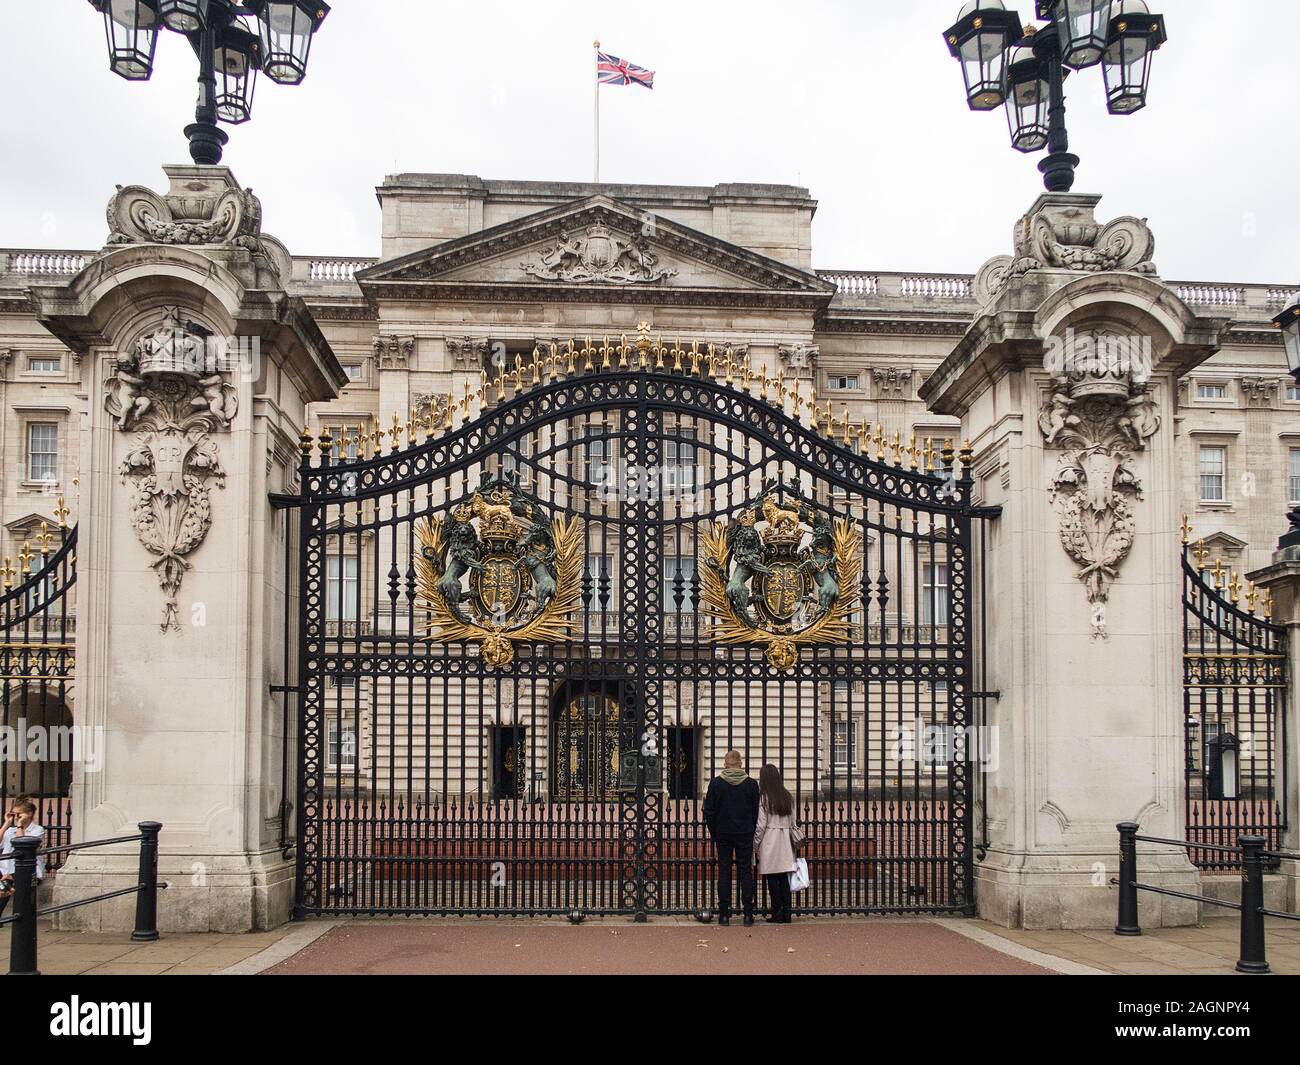 London, United Kingdom - October, 2018: Tourist in front of the Gates of Buckingham Palace the residence of British royal family in London Stock Photo